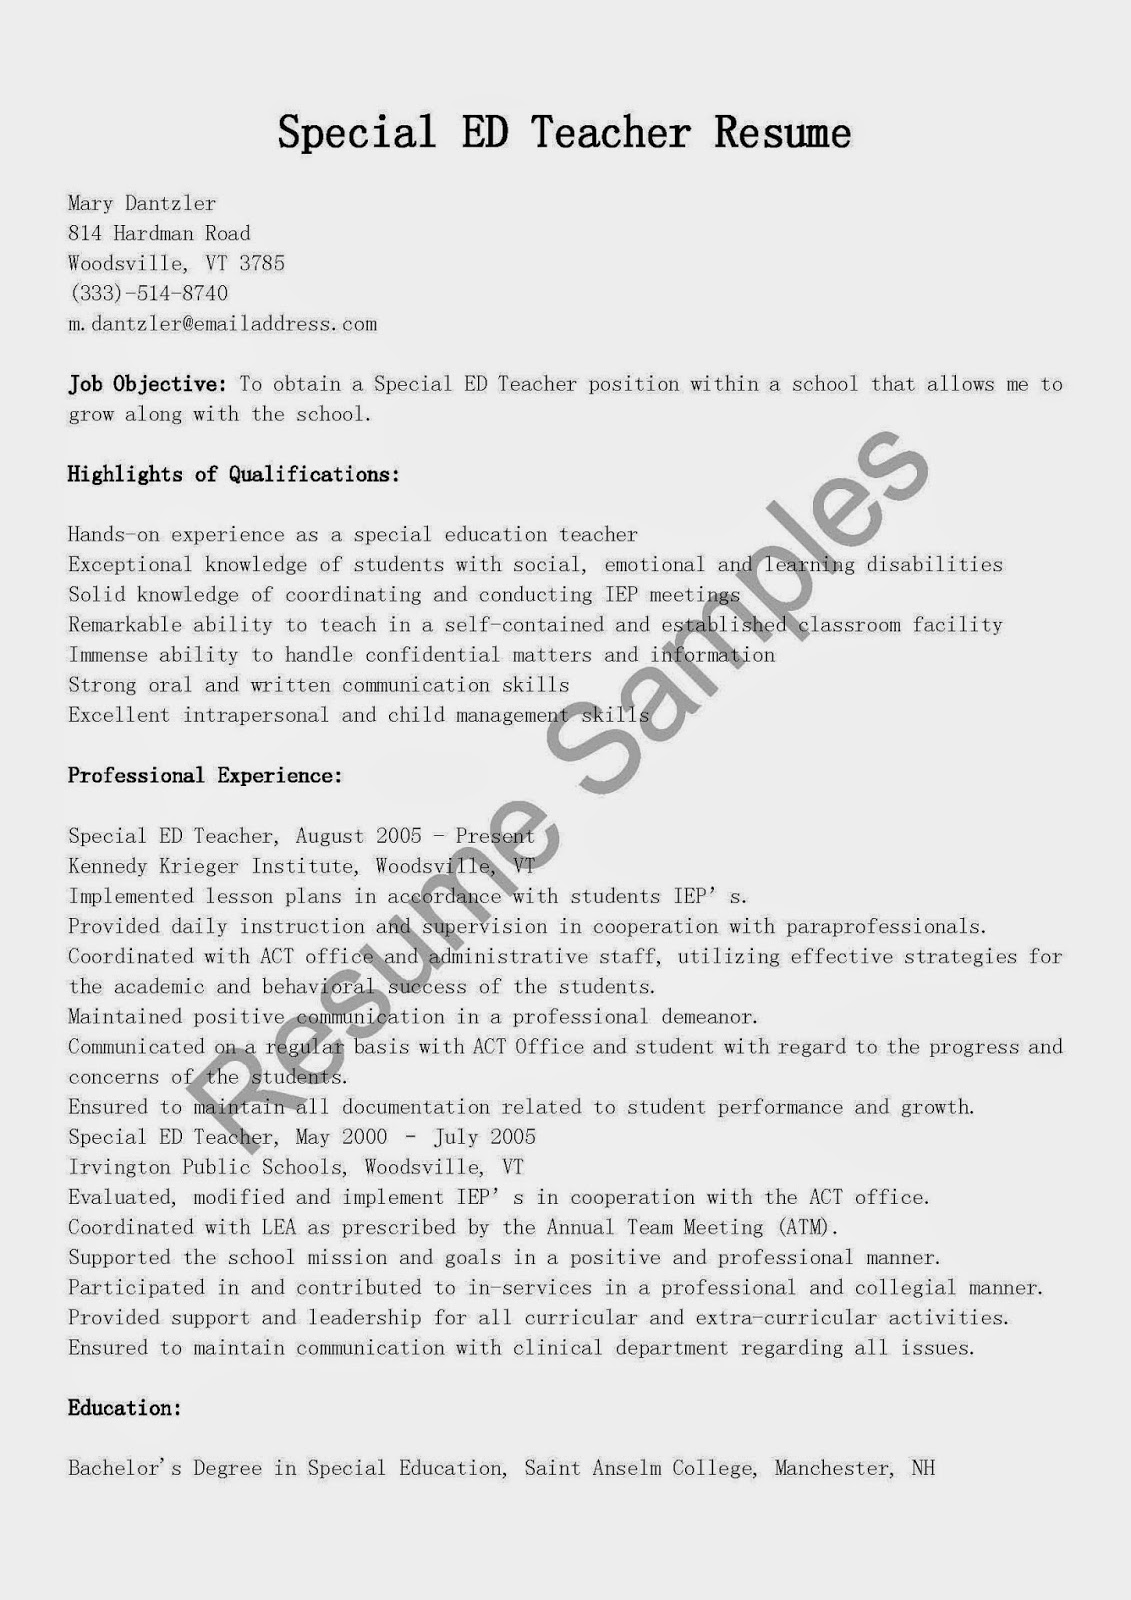 Special education teacher resume examples